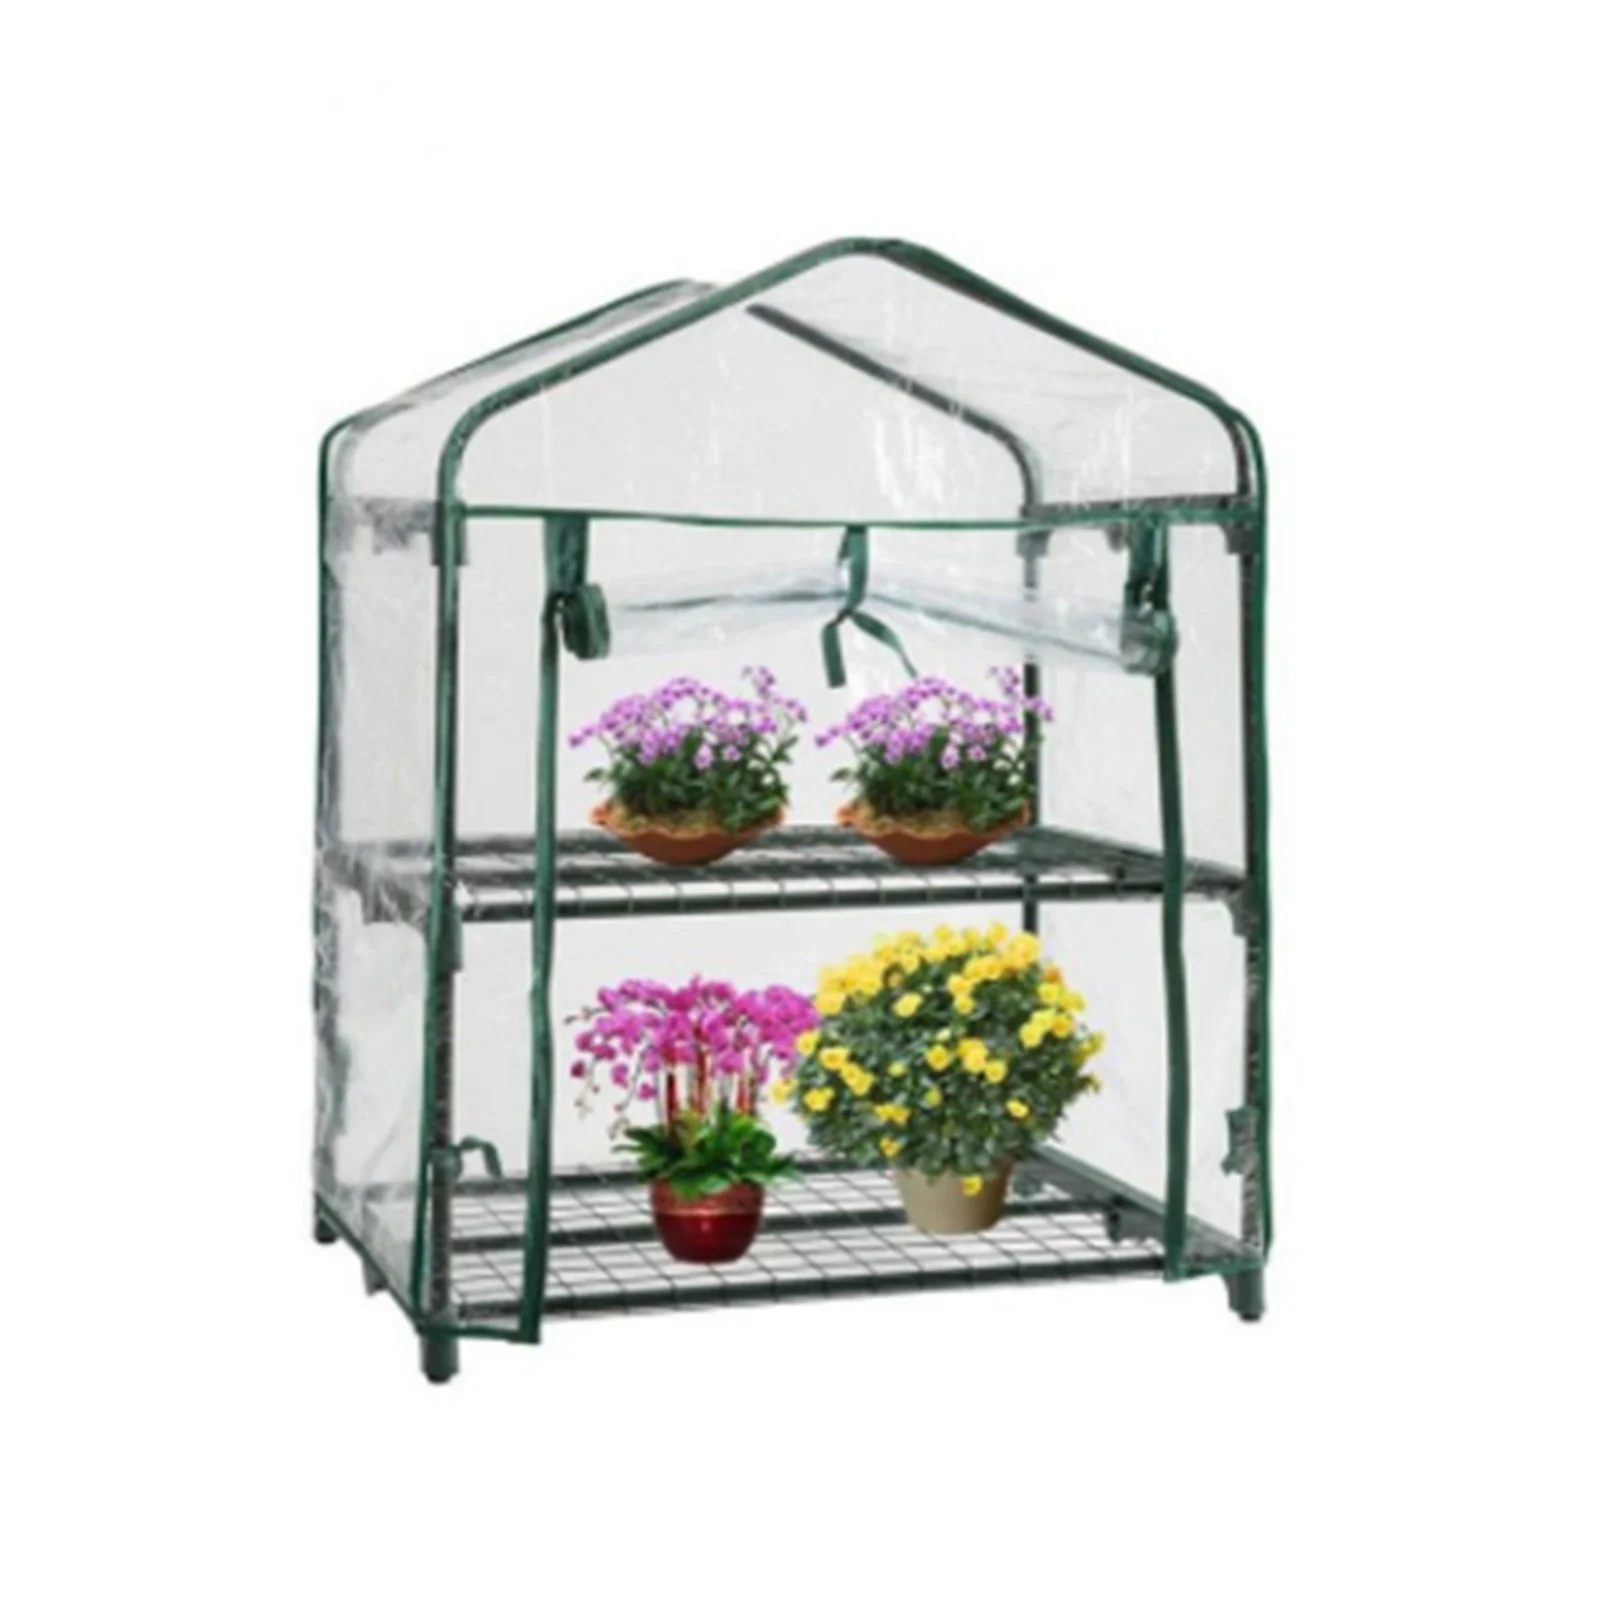 

Garden Flower Plant Cover 3 Tier Anti-UV Waterproof Greenhouse Cover for Outdoor Gardening Plants